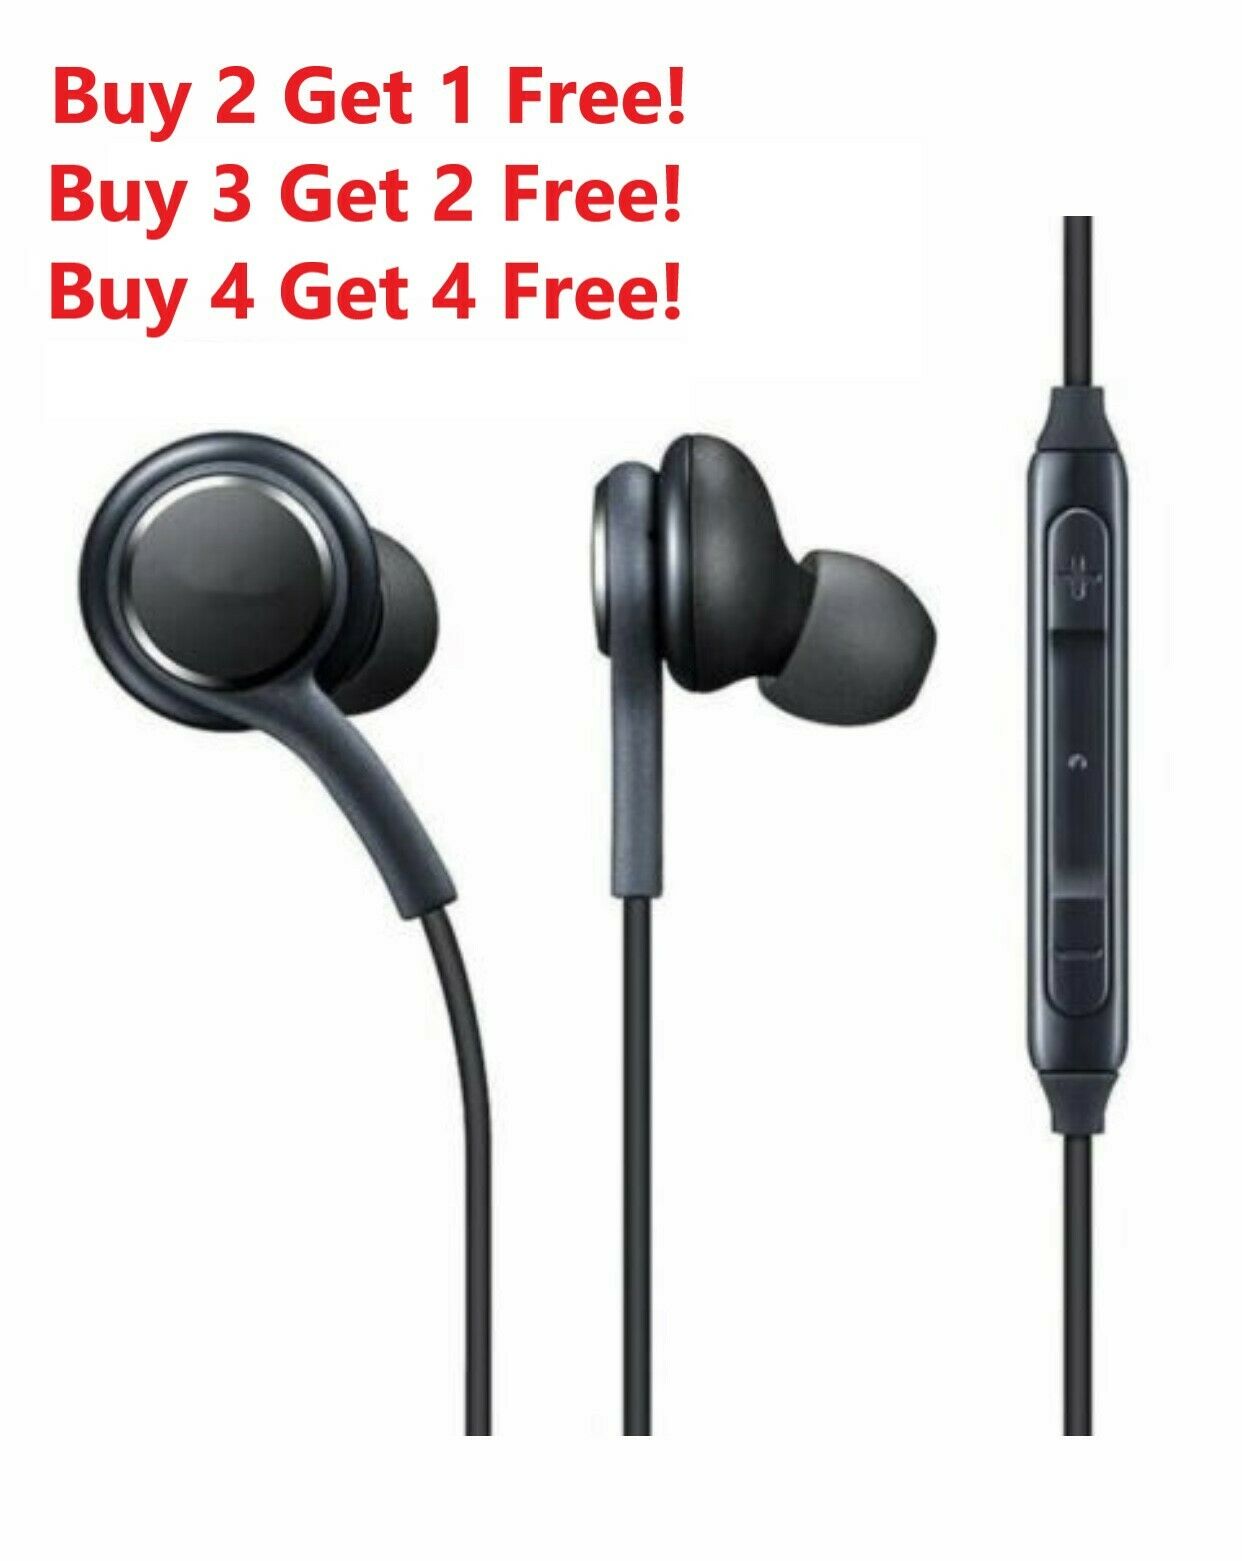 For Samsung Galaxy S8 S8+ S9 S10 Note 8 In-ear Earbuds Headphones Headset